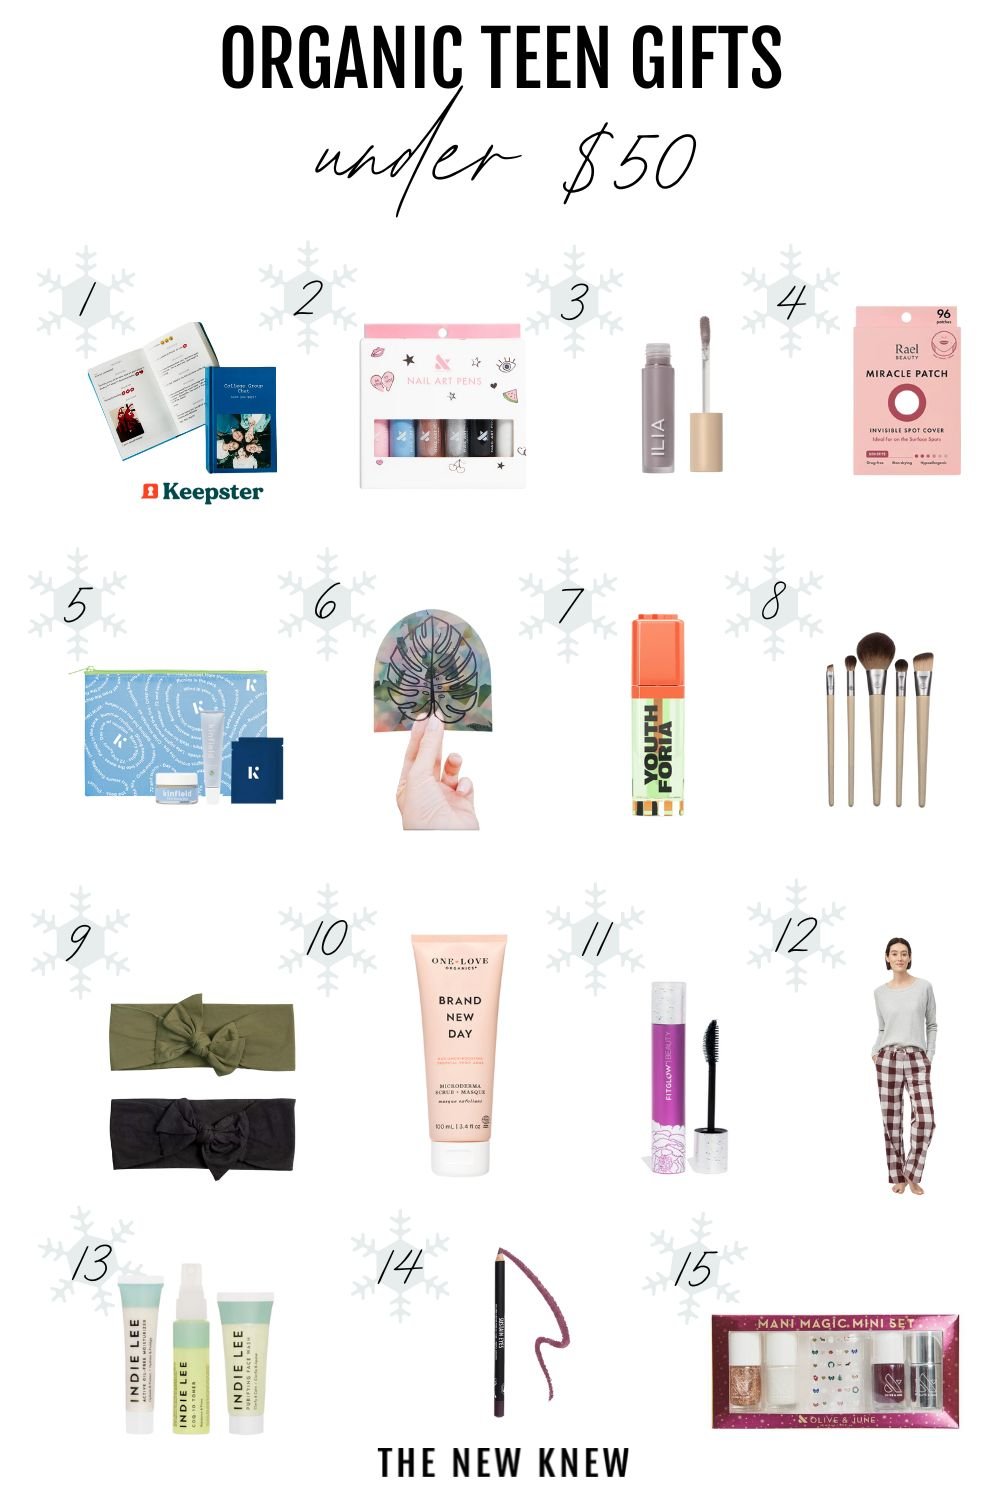 A collection of 15 products under $50 that are organic and good picks as gifts for teens.